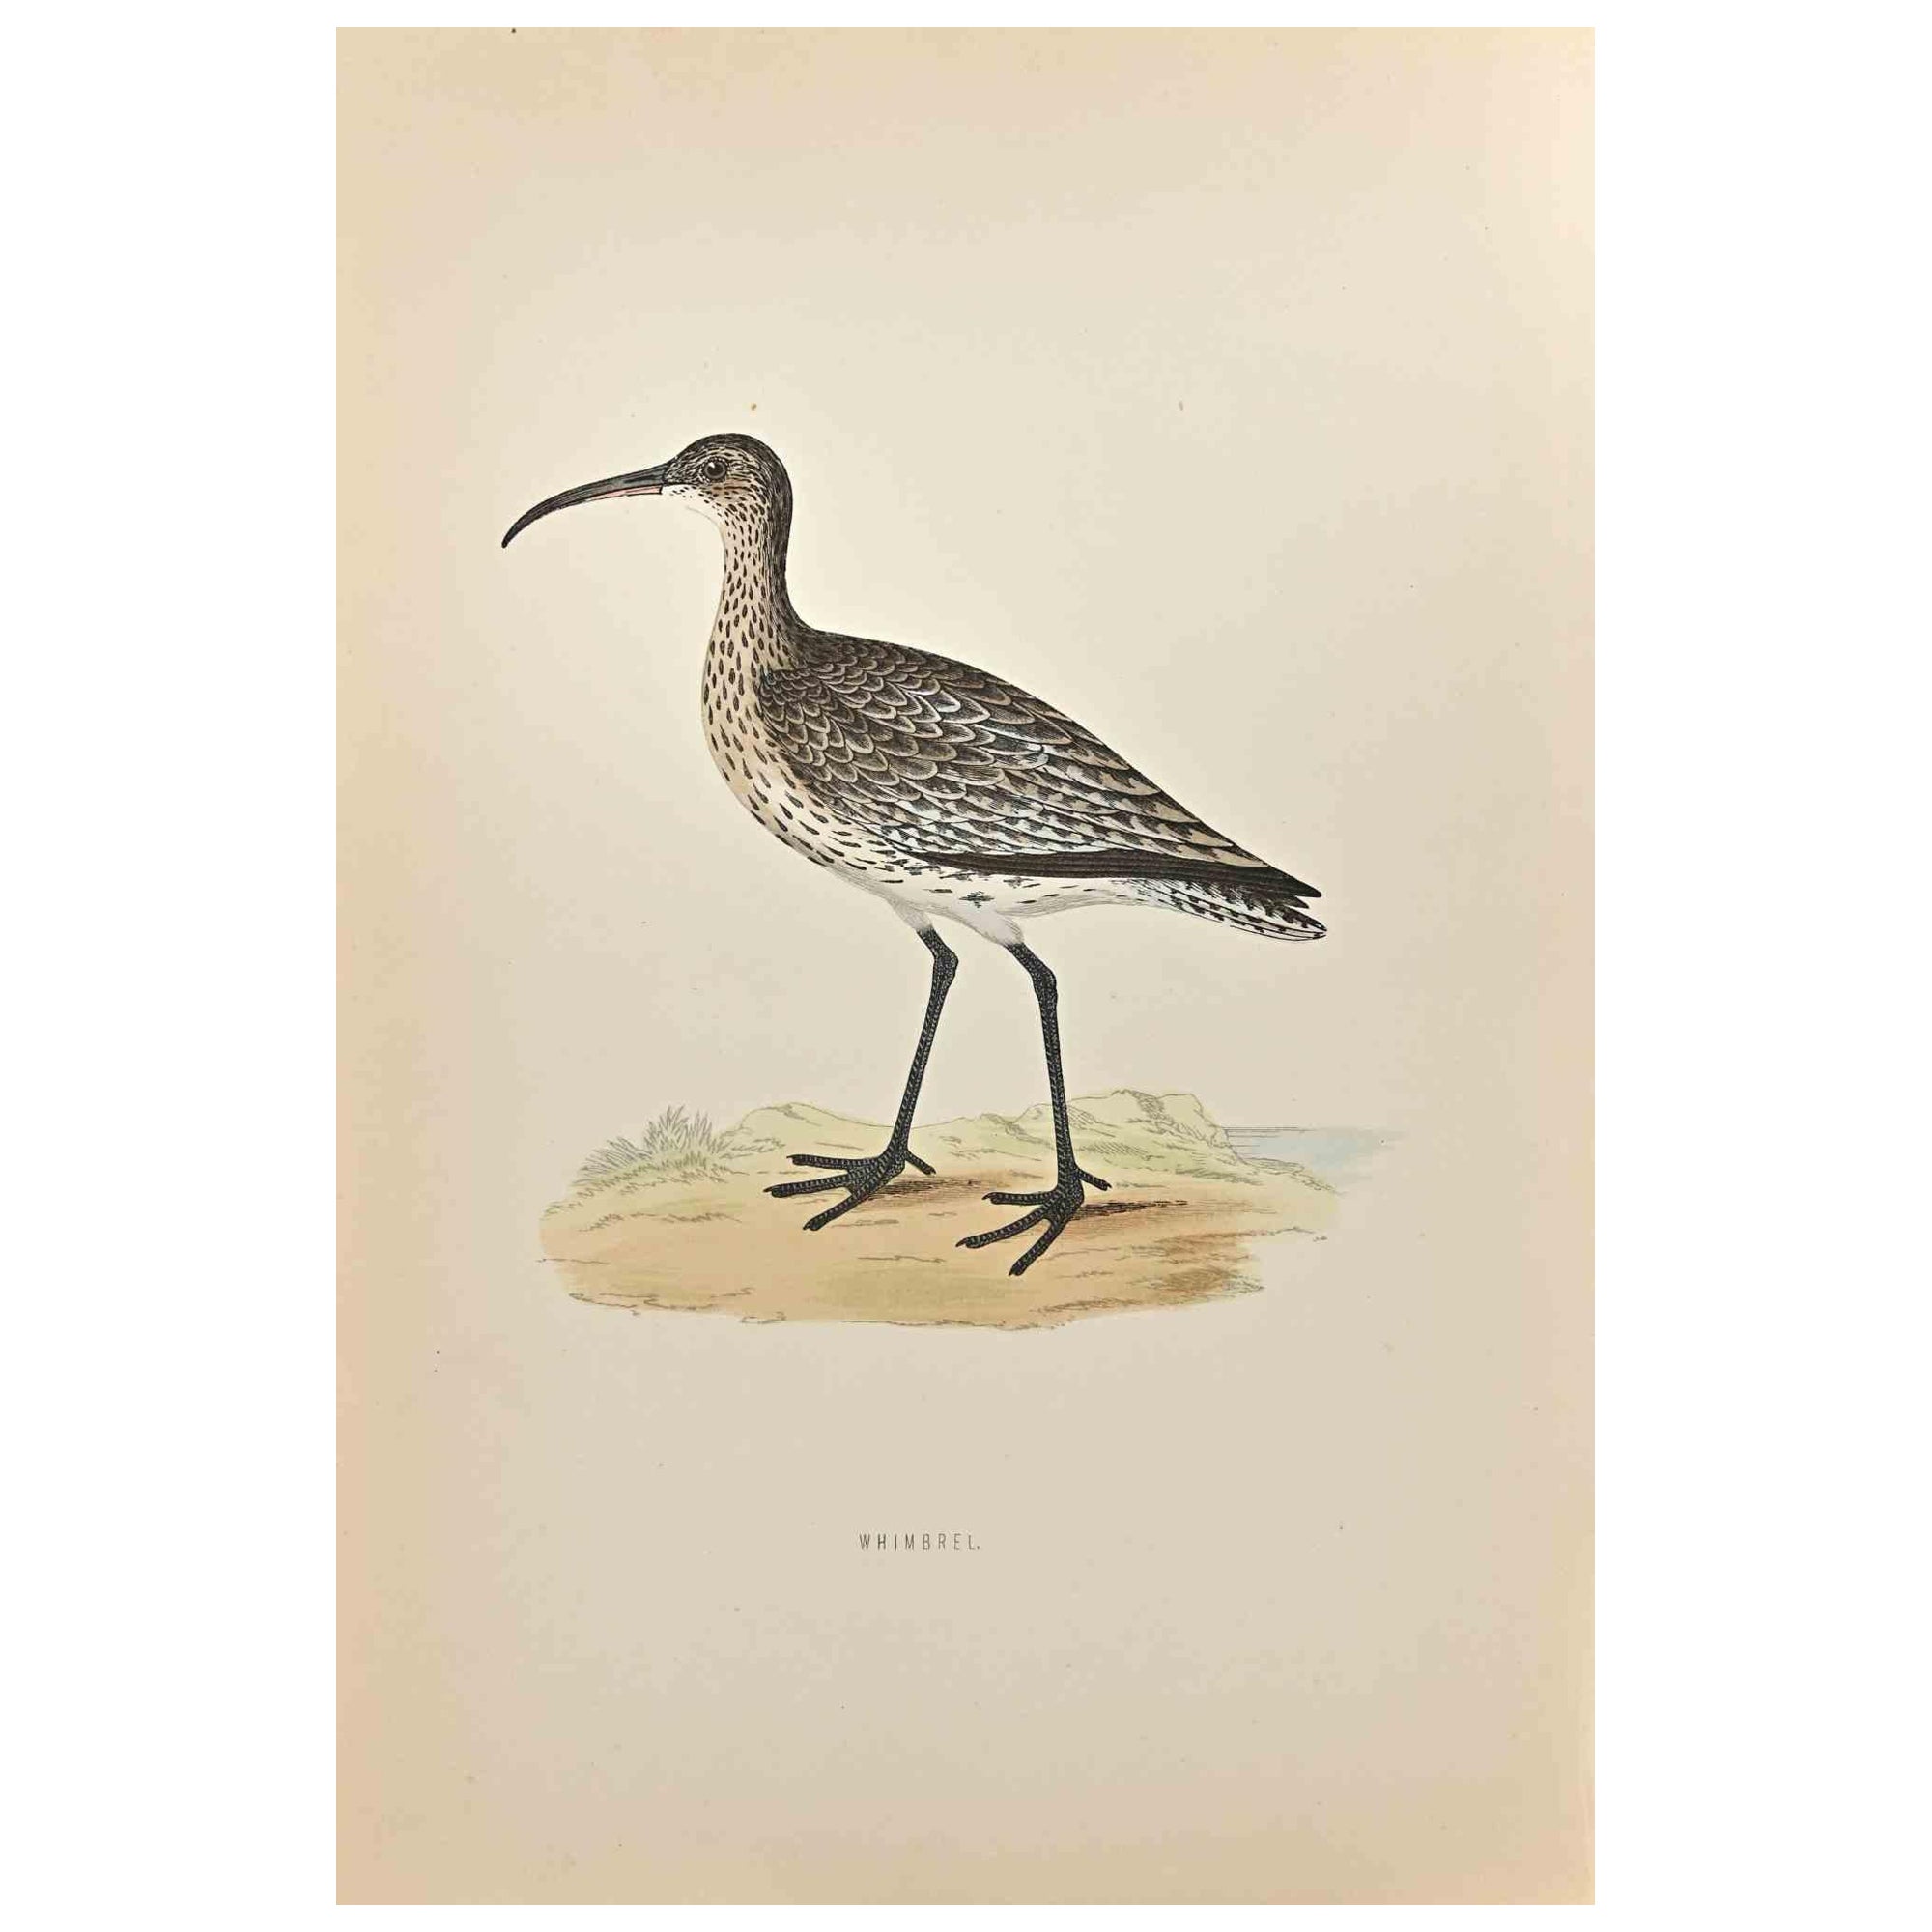 Whimbrel is a modern artwork realized in 1870 by the British artist Alexander Francis Lydon (1836-1917).

Woodcut print on ivory-colored paper.

Hand-colored, published by London, Bell & Sons, 1870.  

The name of the bird is printed on the plate.